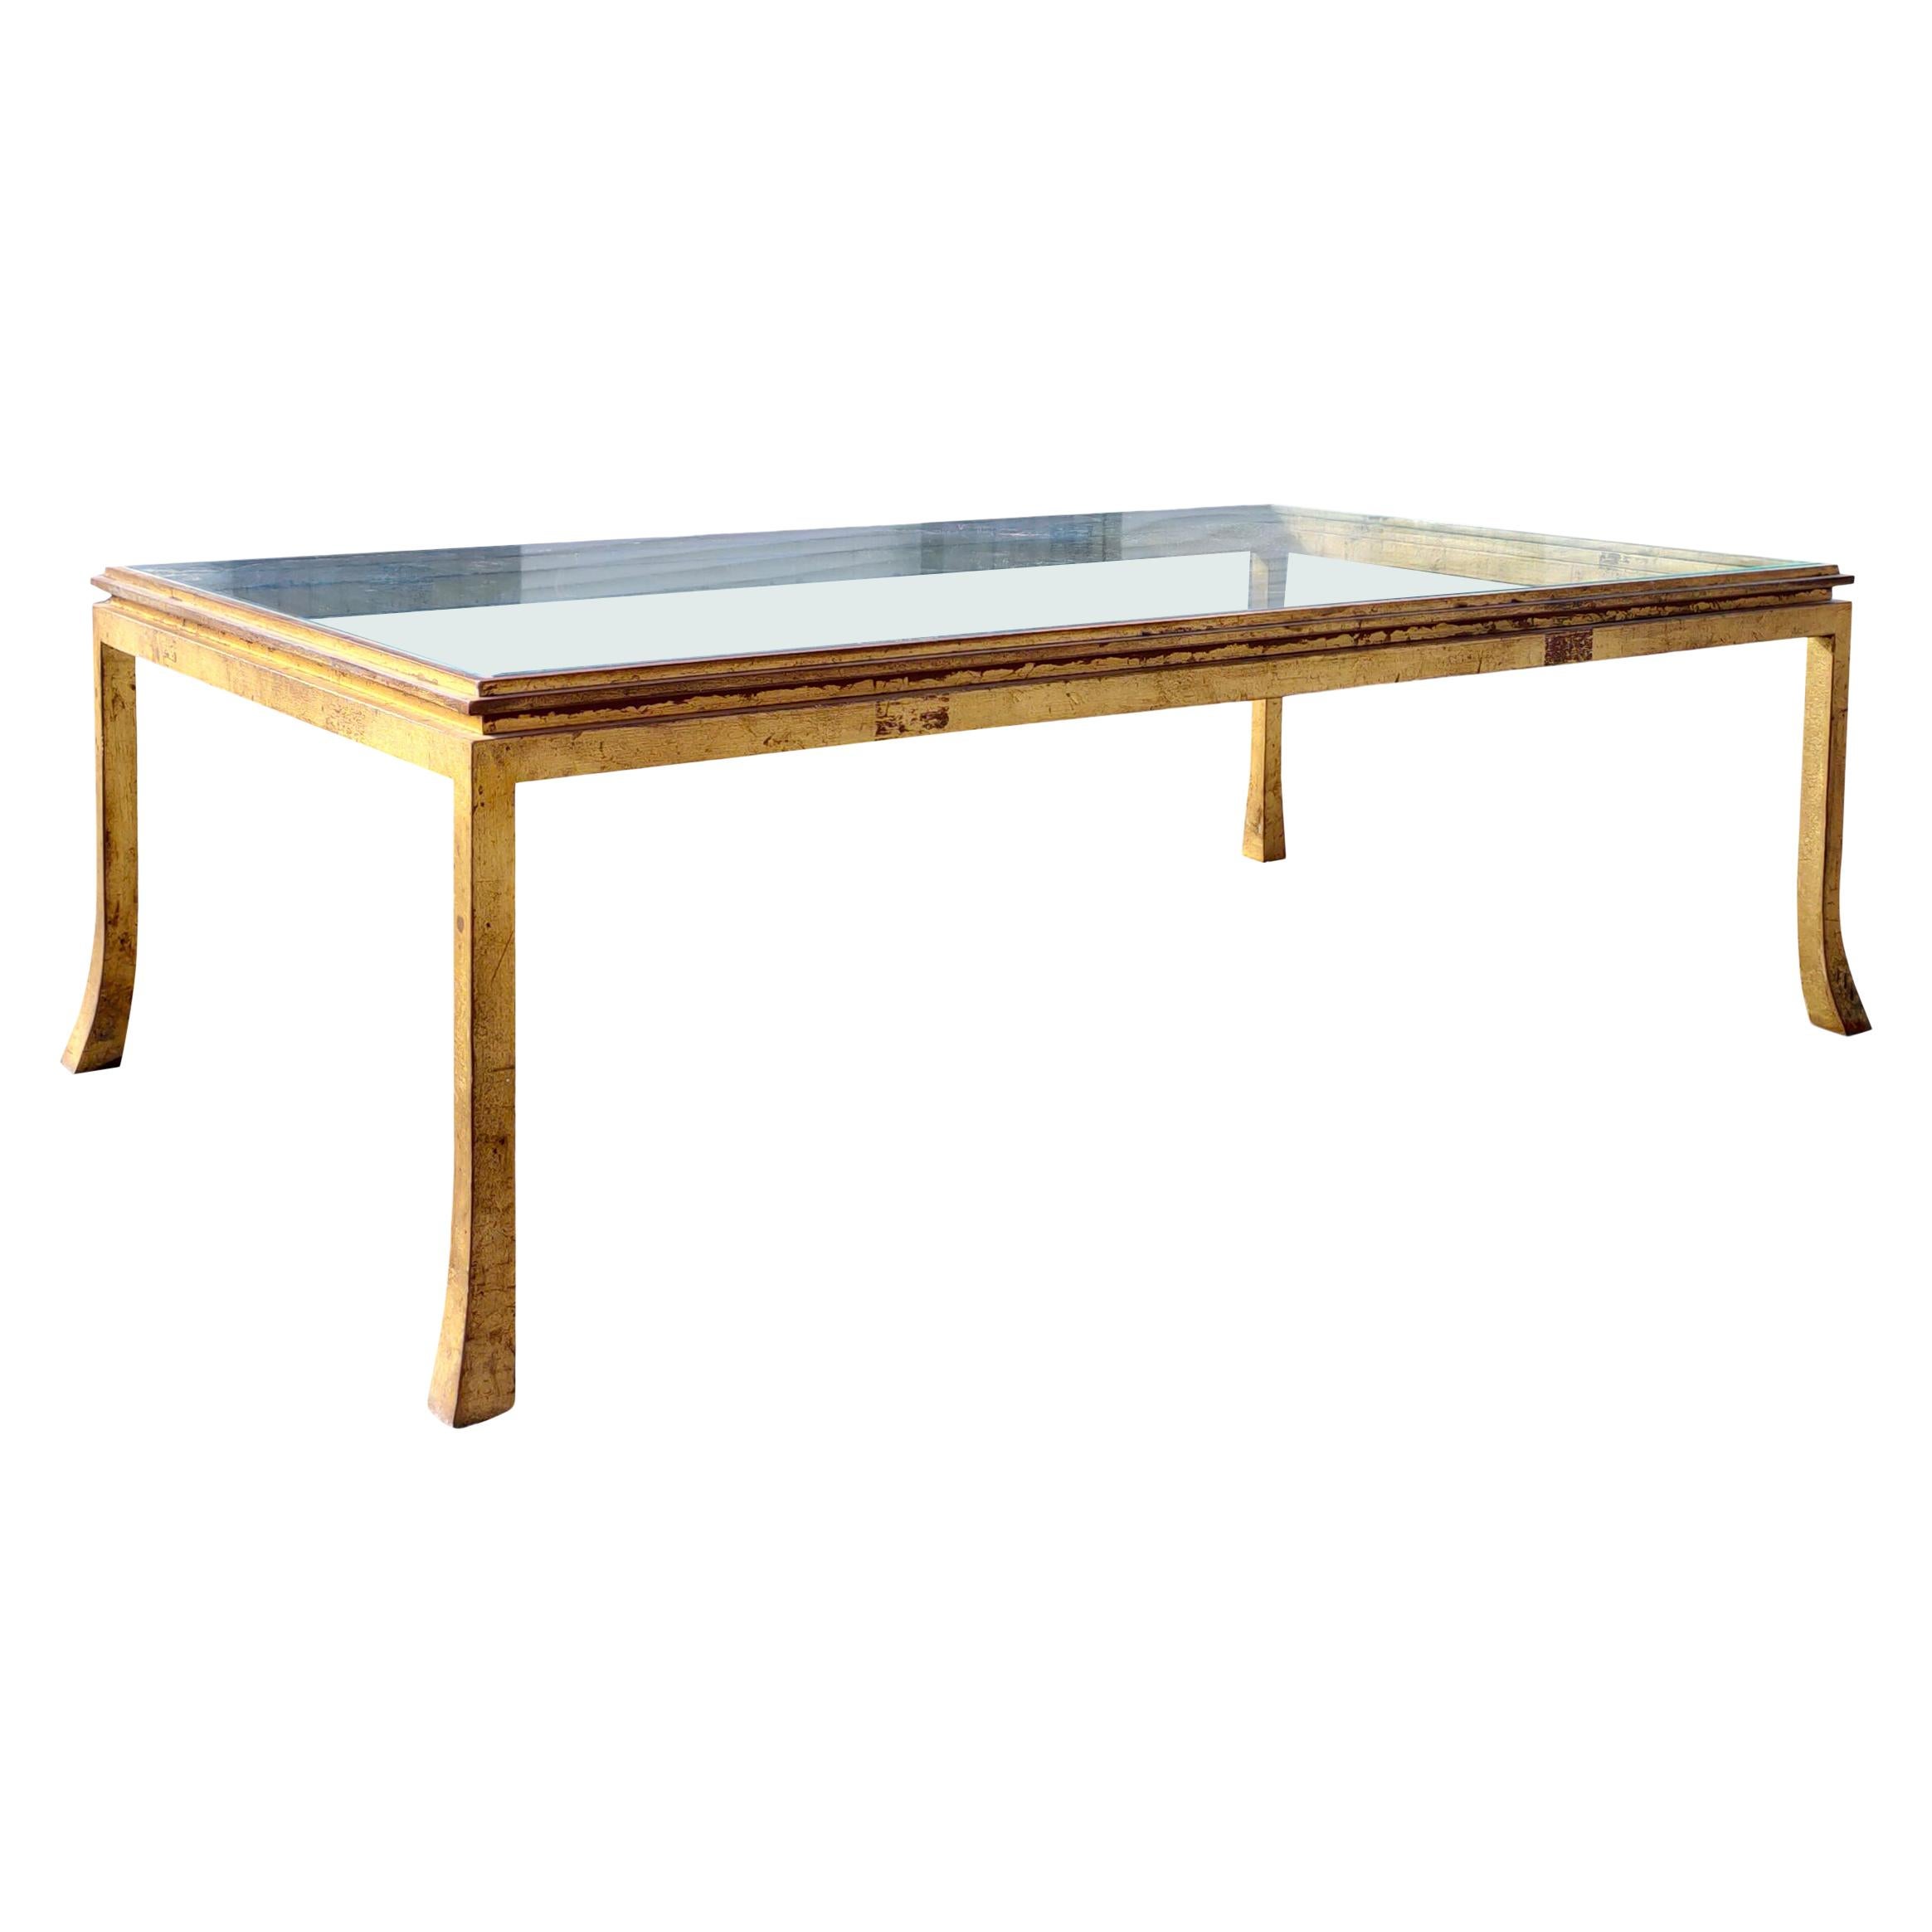 "Courbes" gold leaf coffee table by Henri Pouenat for Ramsay - France 1960's